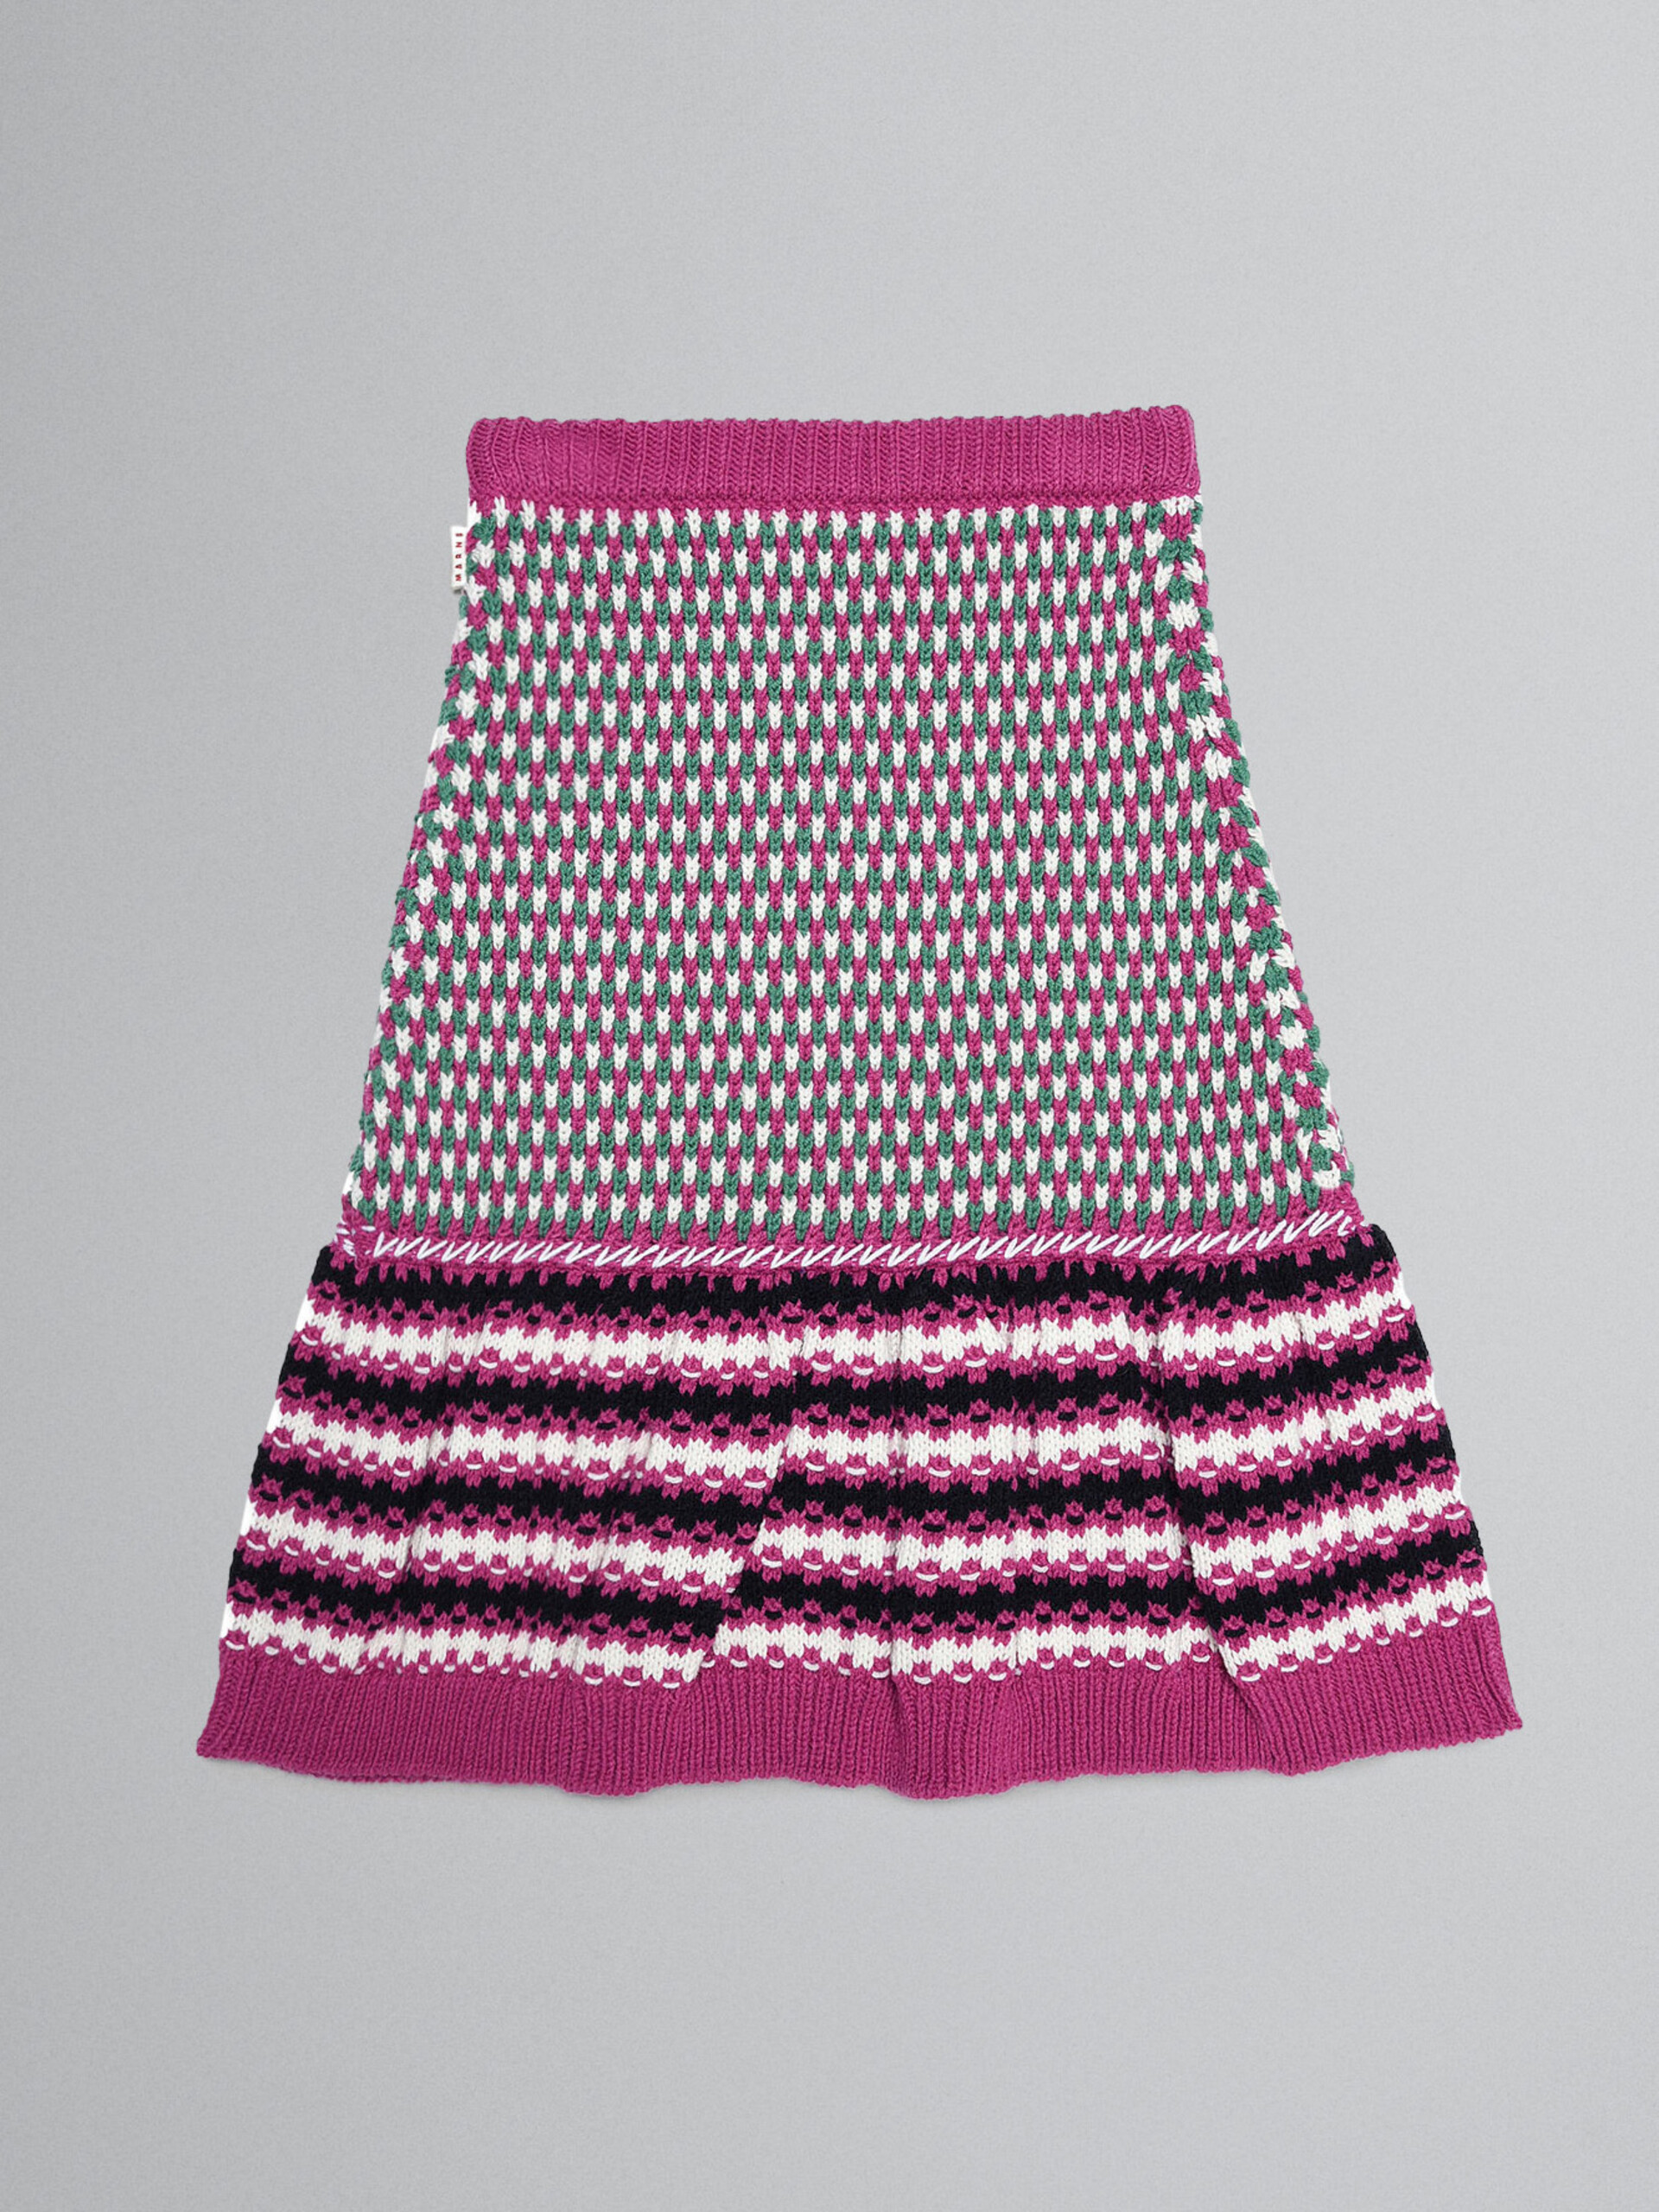 Multicolour knitted skirt with flounce hem - Skirts - Image 2